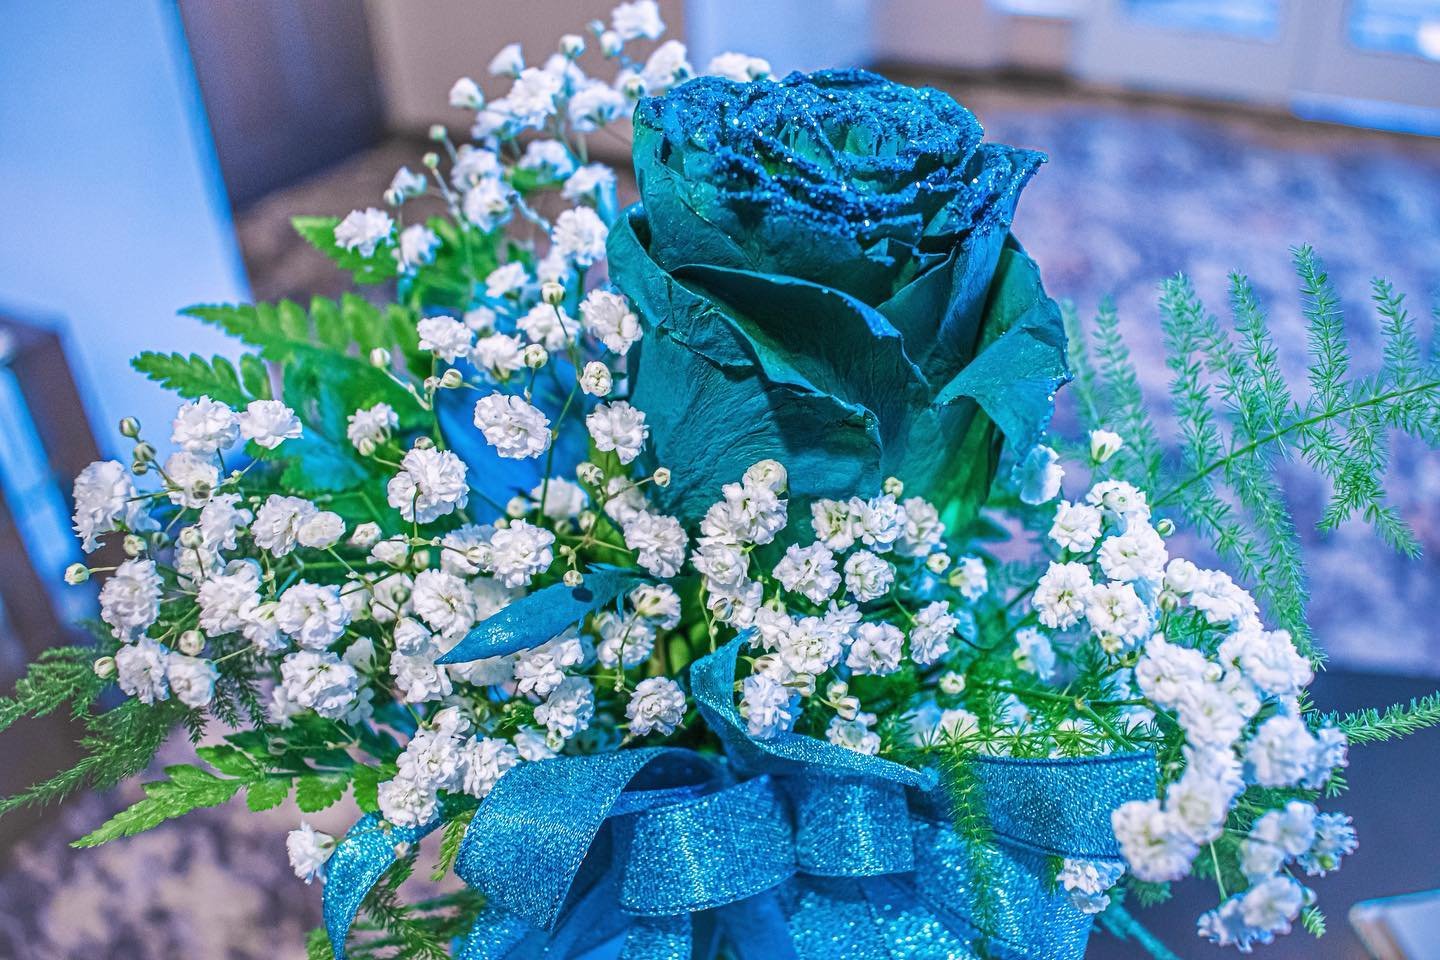 Thank you to Mary Sardone of Flo&rsquo;s Floral and Gift Shop for the  beautiful teal flower arrangements  provided at Jenn&rsquo;s Celebration of Life on Saturday April 20th at The Hilton Garden Inn.